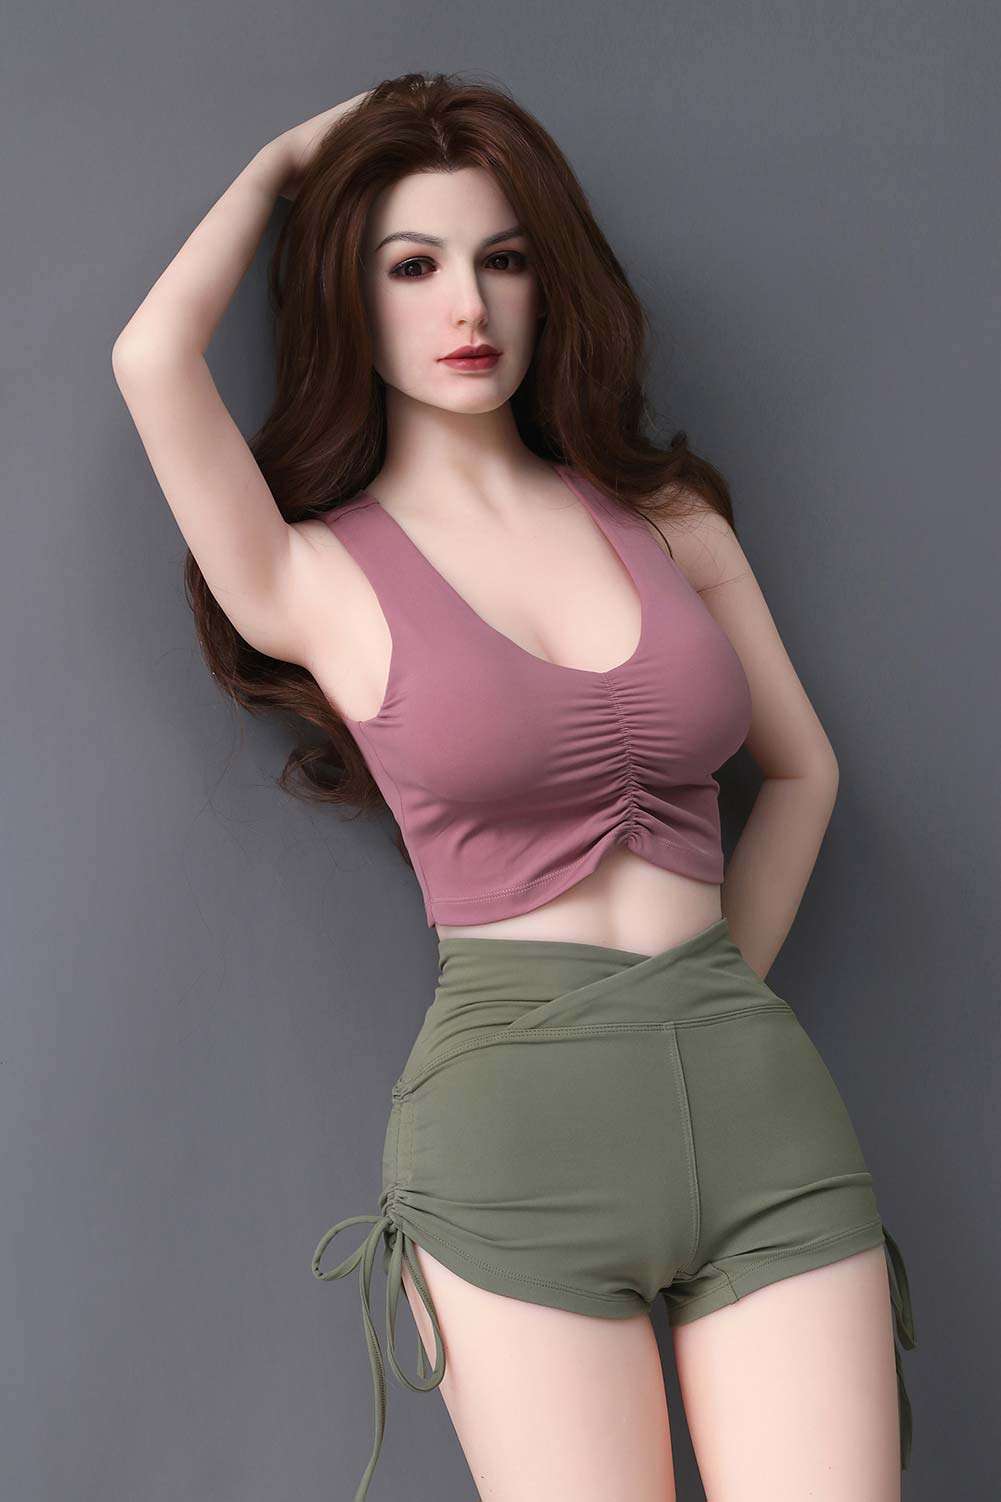 In Stock 5.41ft / 165cm Sex Life Sex Doll - Wendy